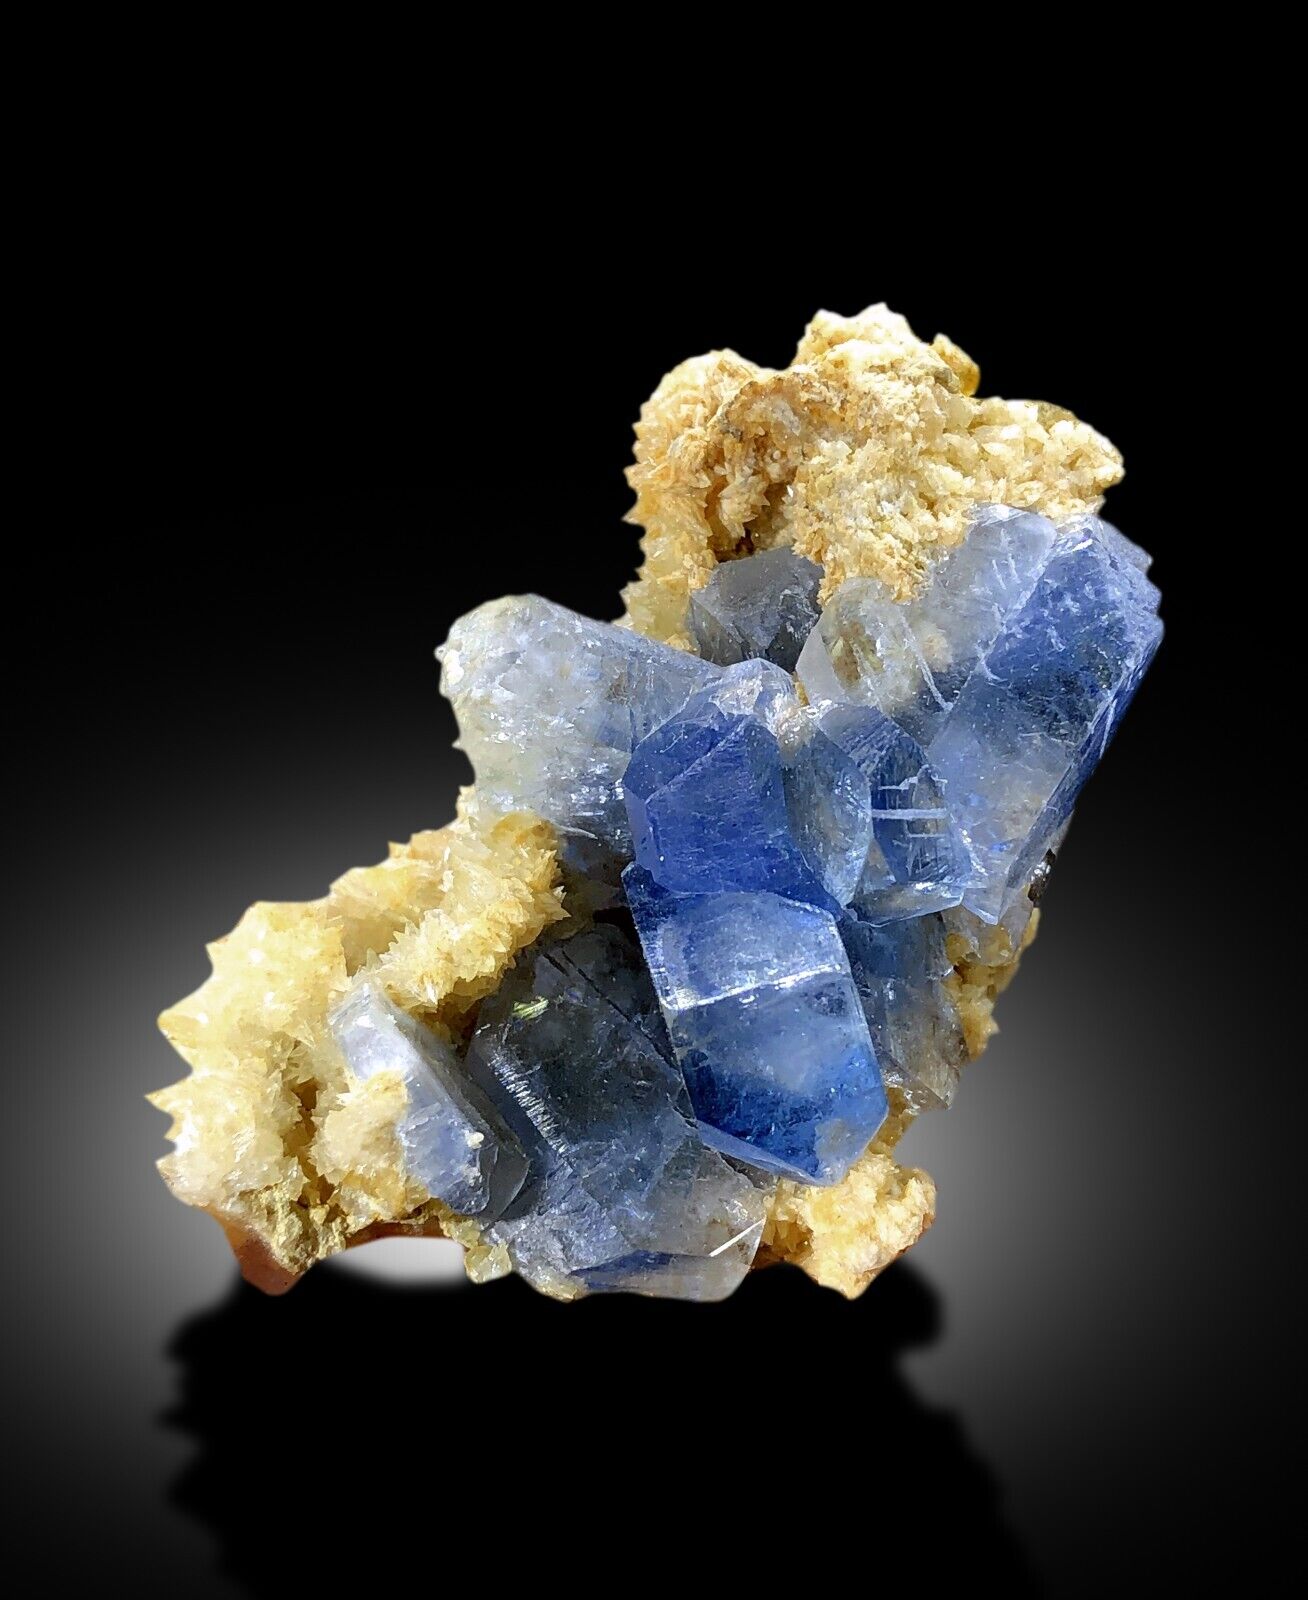 Blue Celestine Crystals with Yellow Calcite from Afghanistan, 30 gram